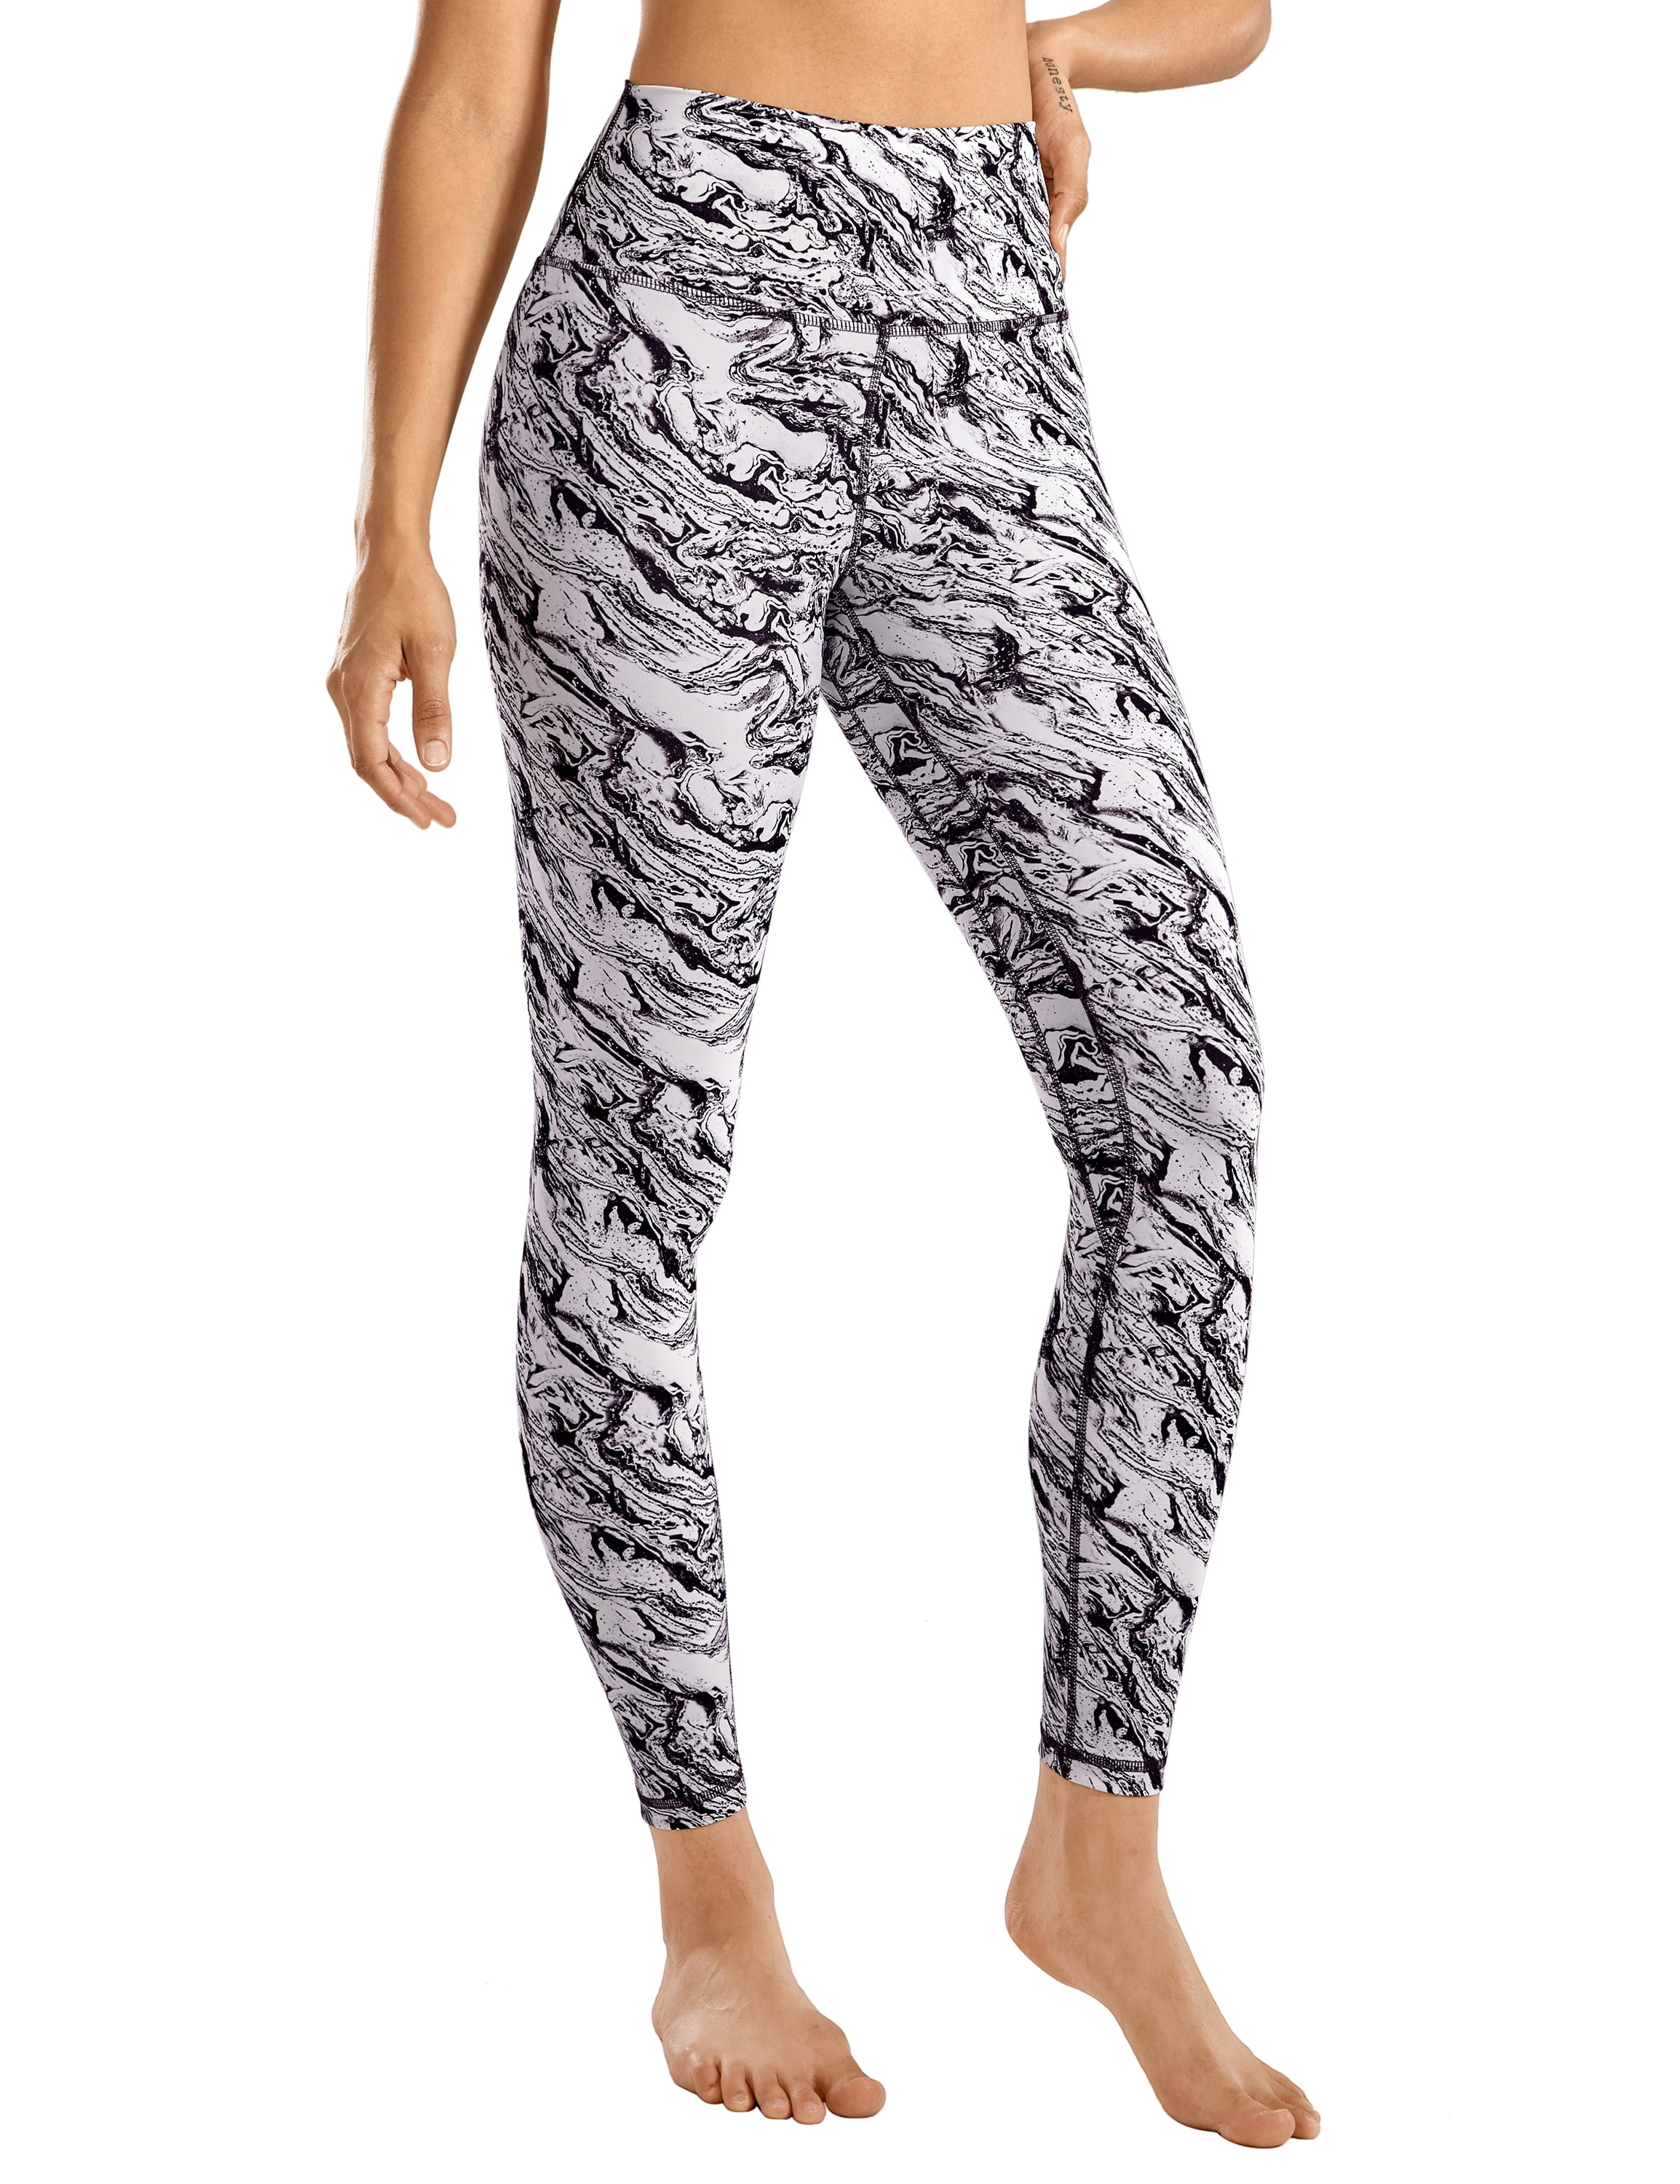 Buy CRZ YOGA Women's High Waisted Workout Pants 7/8 Yoga Leggings with Hole  - Naked Feeling - 25 Inches, Camo Multi 17, XX-Small at